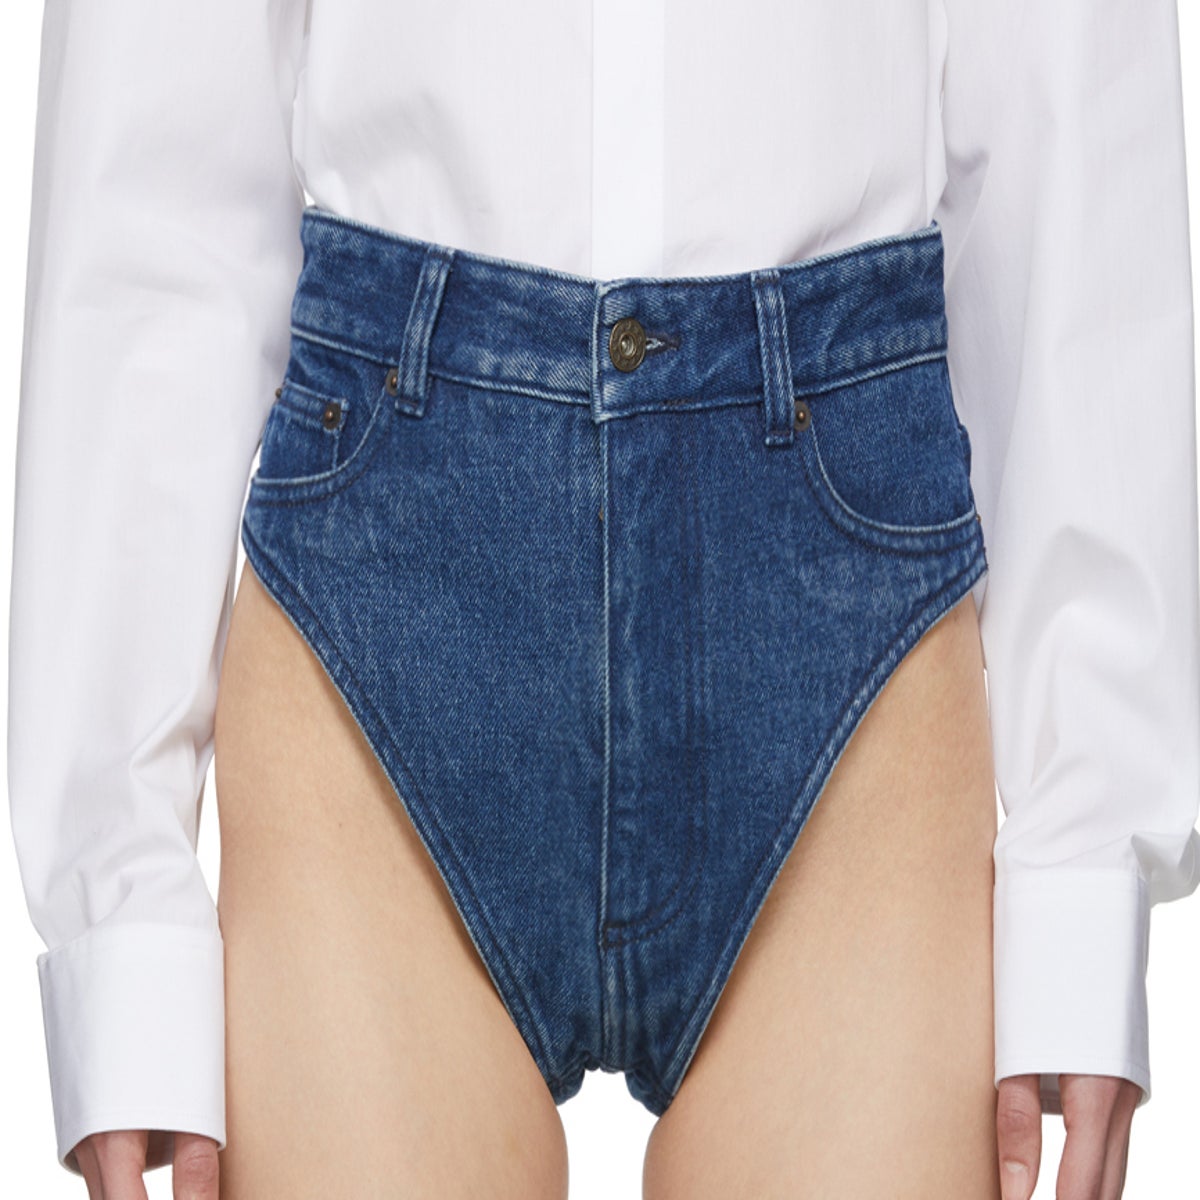 https://static.independent.co.uk/s3fs-public/thumbnails/image/2019/03/27/14/denim-pants-main-edited.jpg?width=1200&height=1200&fit=crop